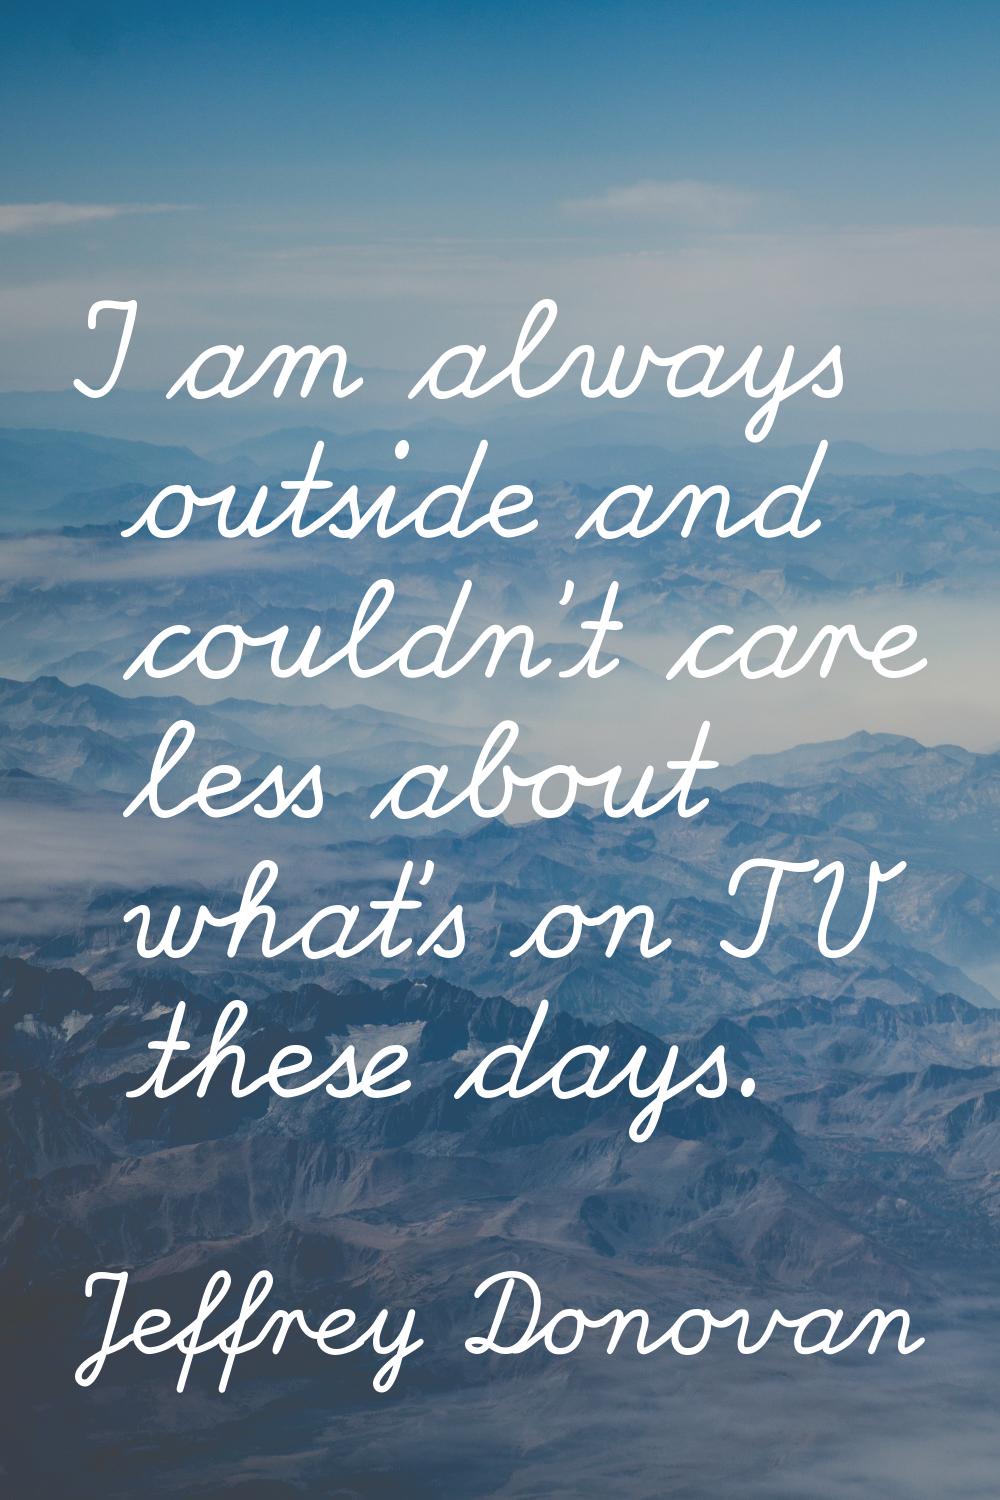 I am always outside and couldn't care less about what's on TV these days.